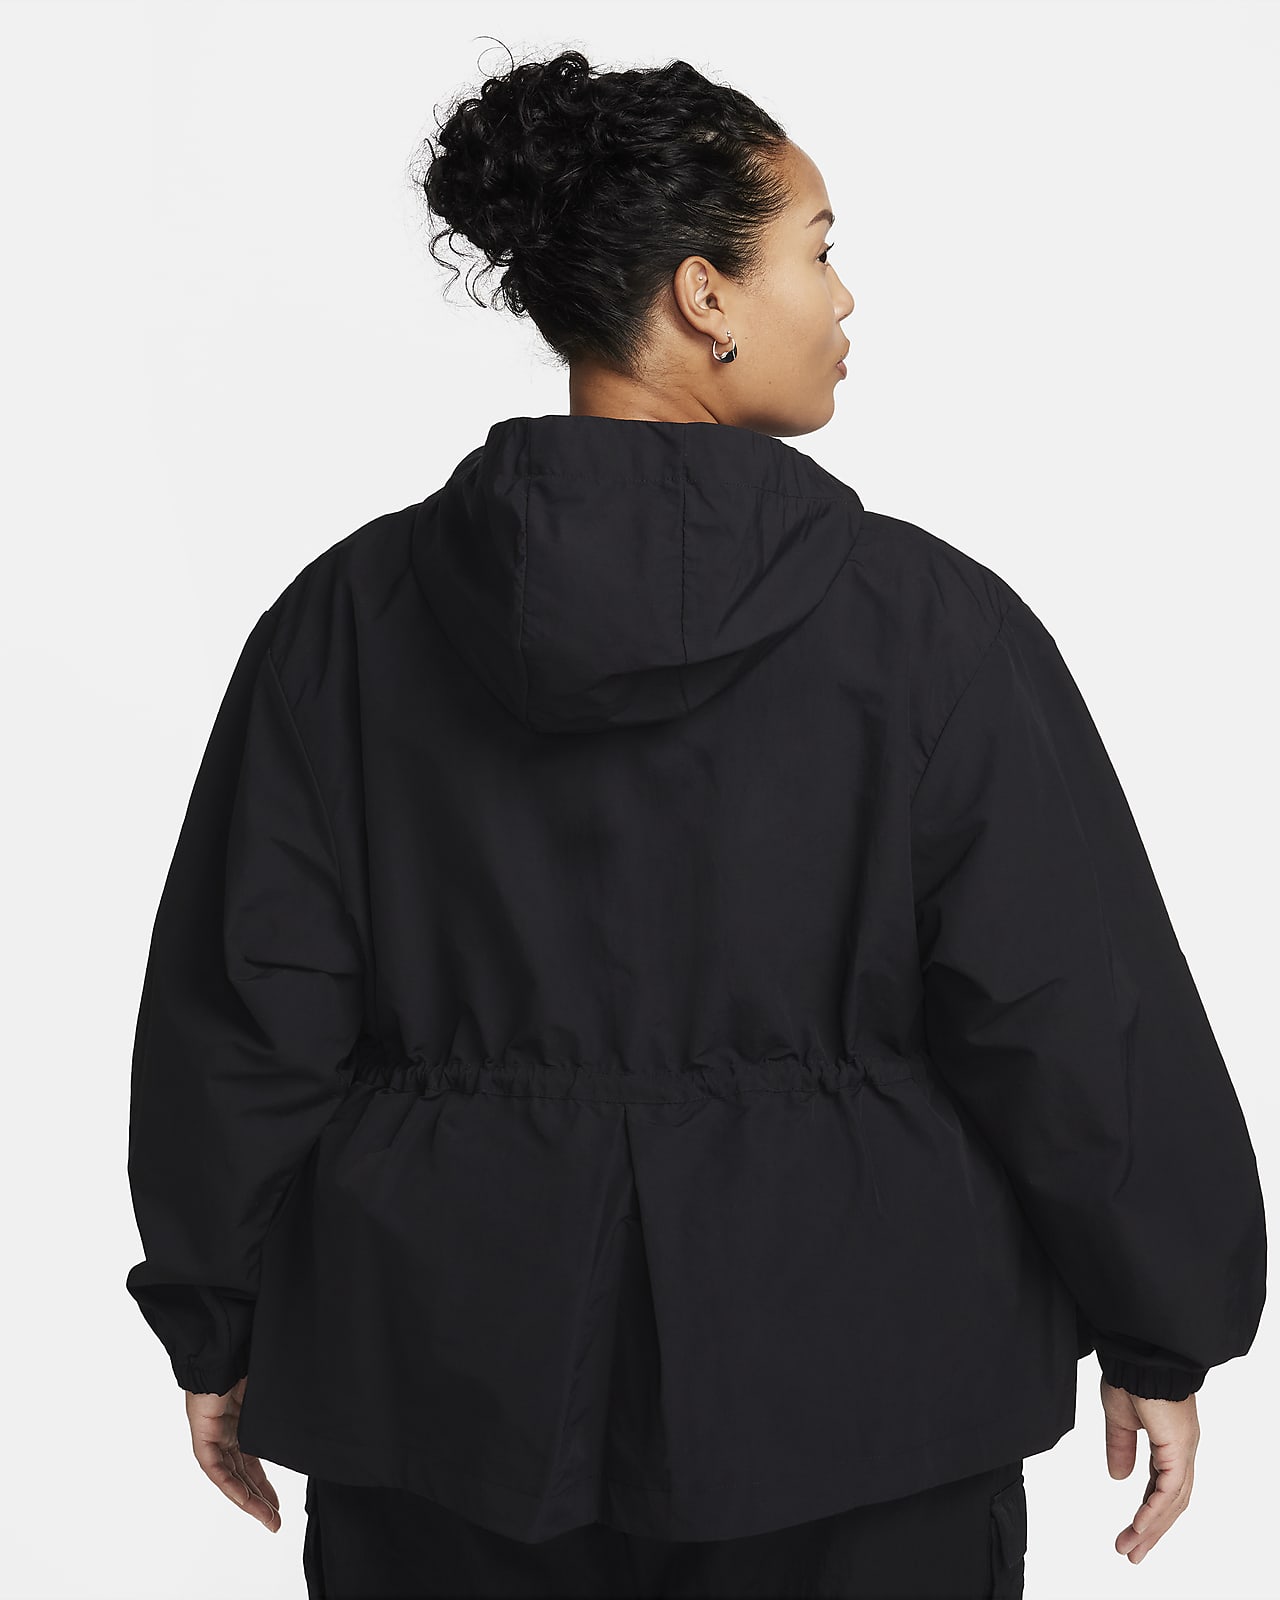 https://static.nike.com/a/images/t_PDP_1280_v1/f_auto,q_auto:eco/9cfdcbc6-3001-445c-b05a-a10b3f2dc638/sportswear-everything-wovens-womens-oversized-hooded-jacket-plus-size-Xtqvdf.png